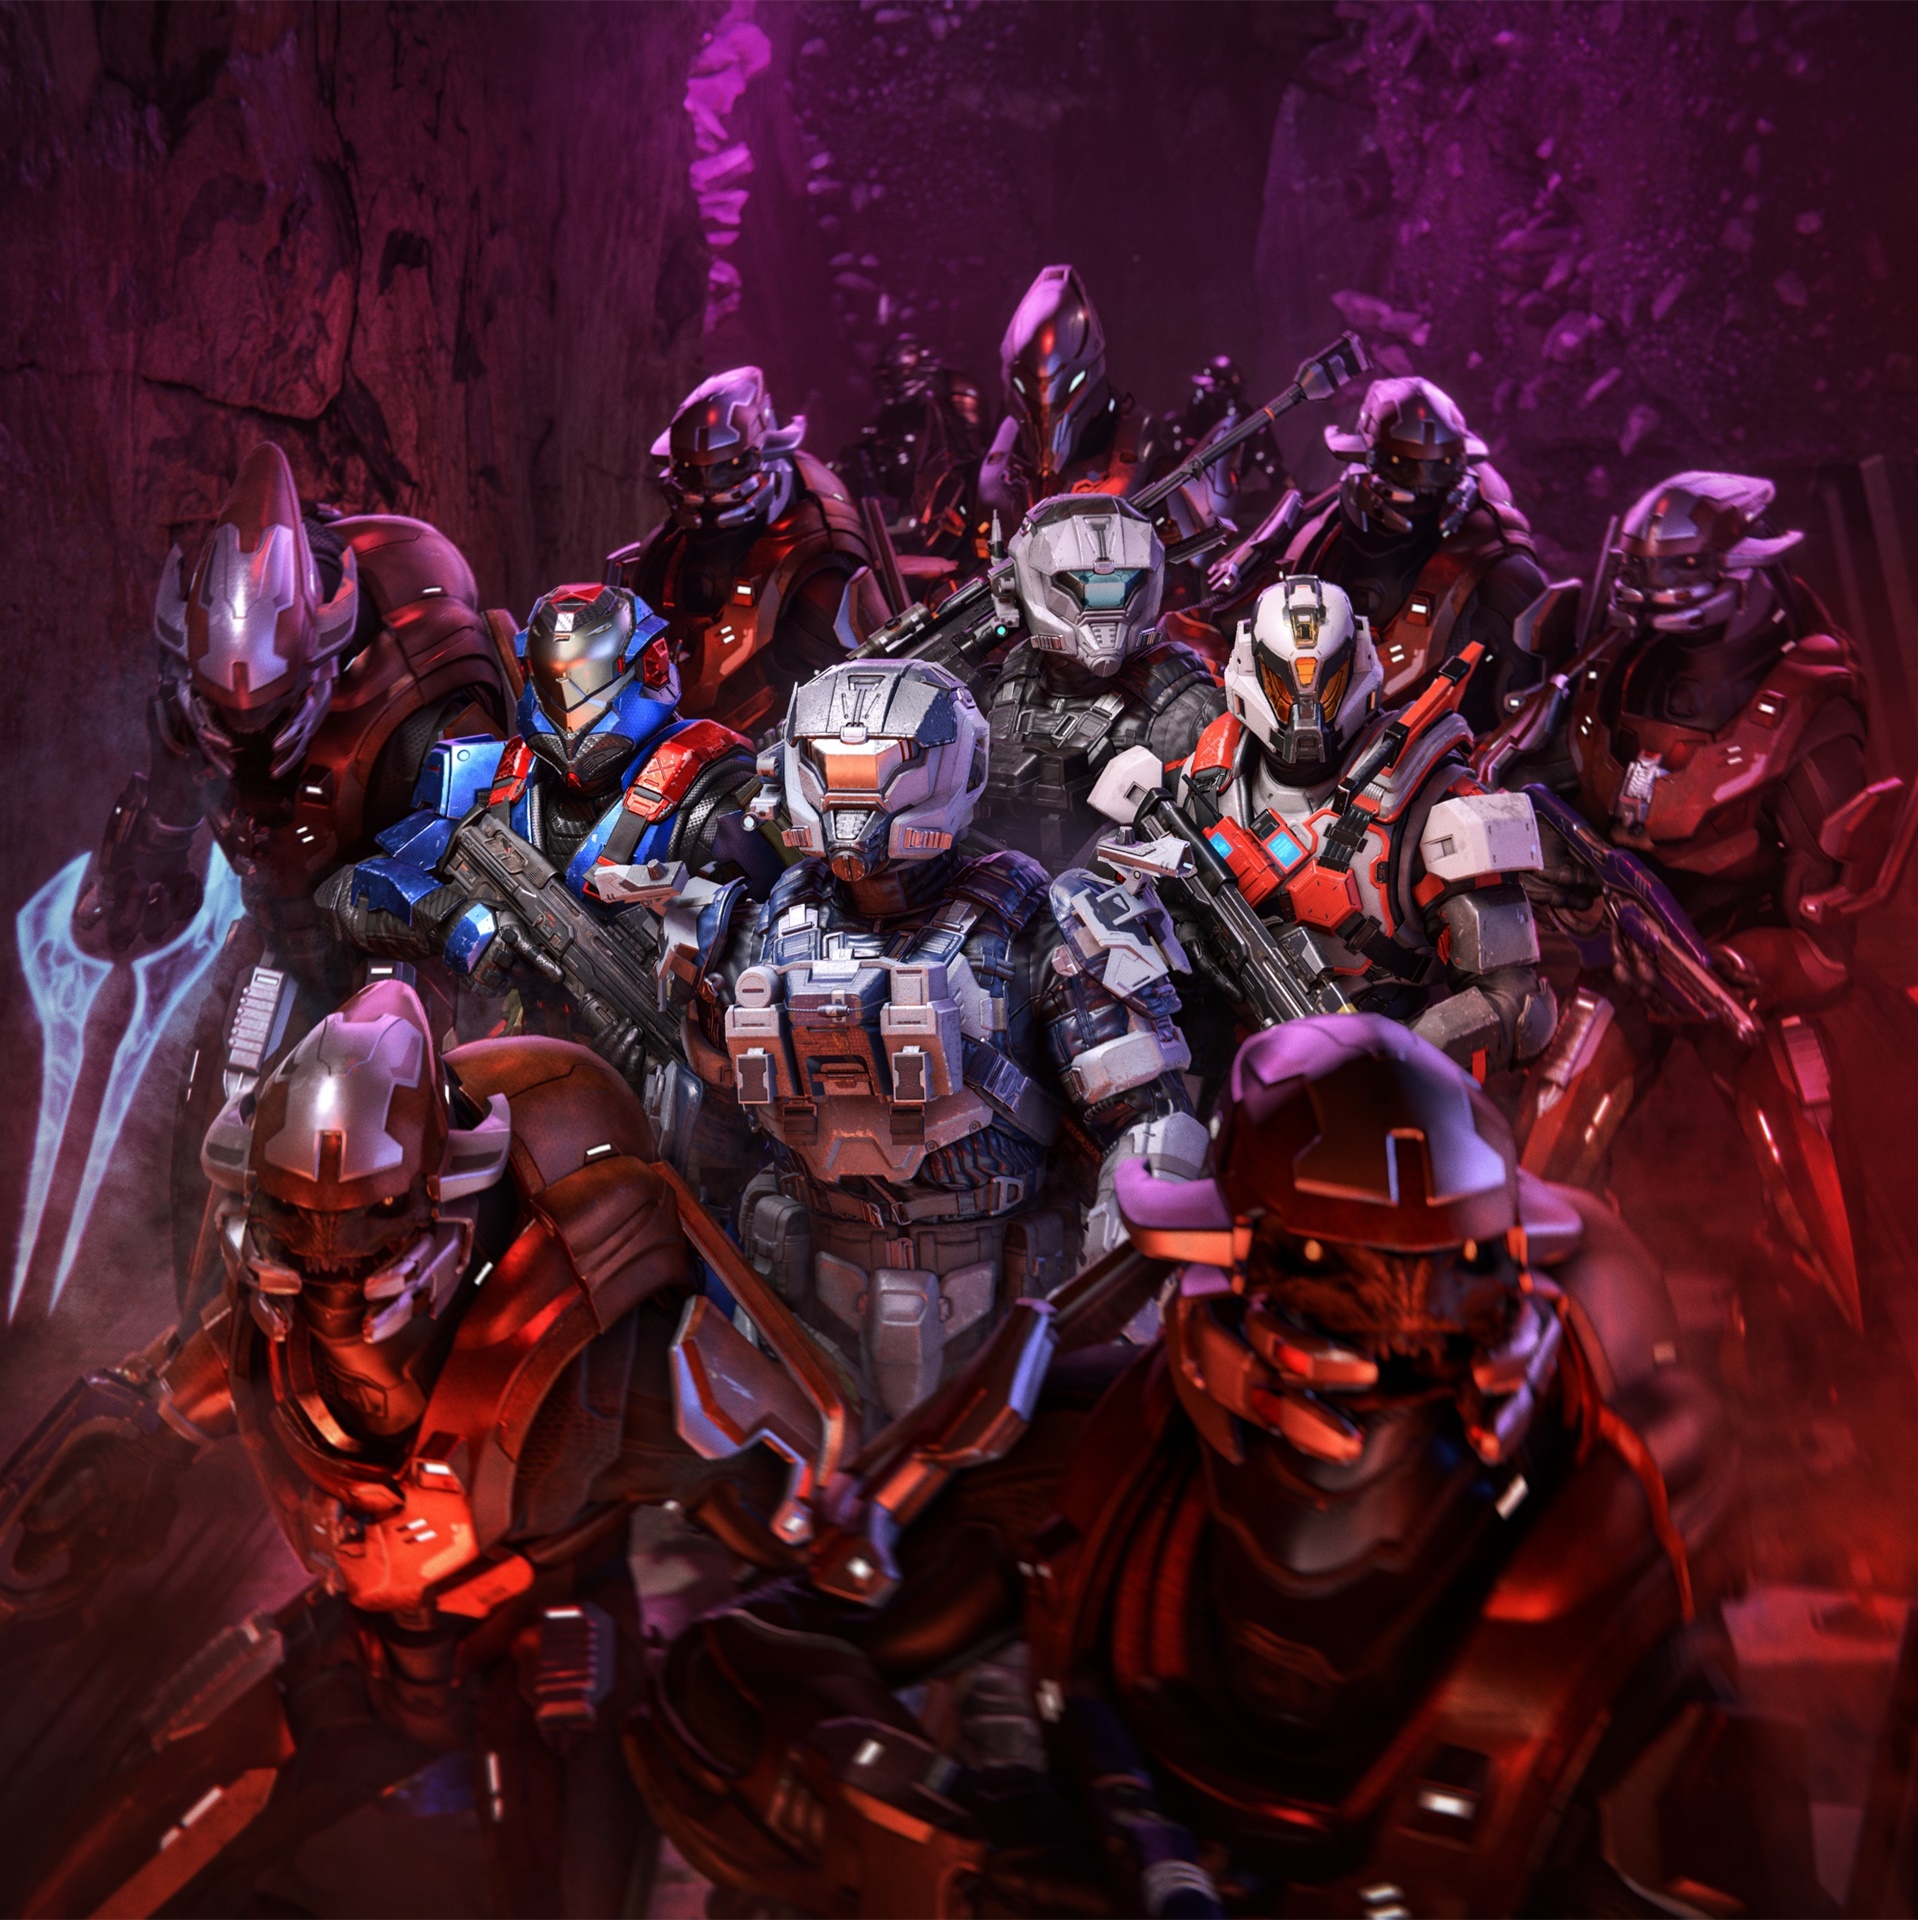 Full cover image of the Spartans of Fireteam Jorogumo surrounded by Swords of Sanghelios allies on Prism